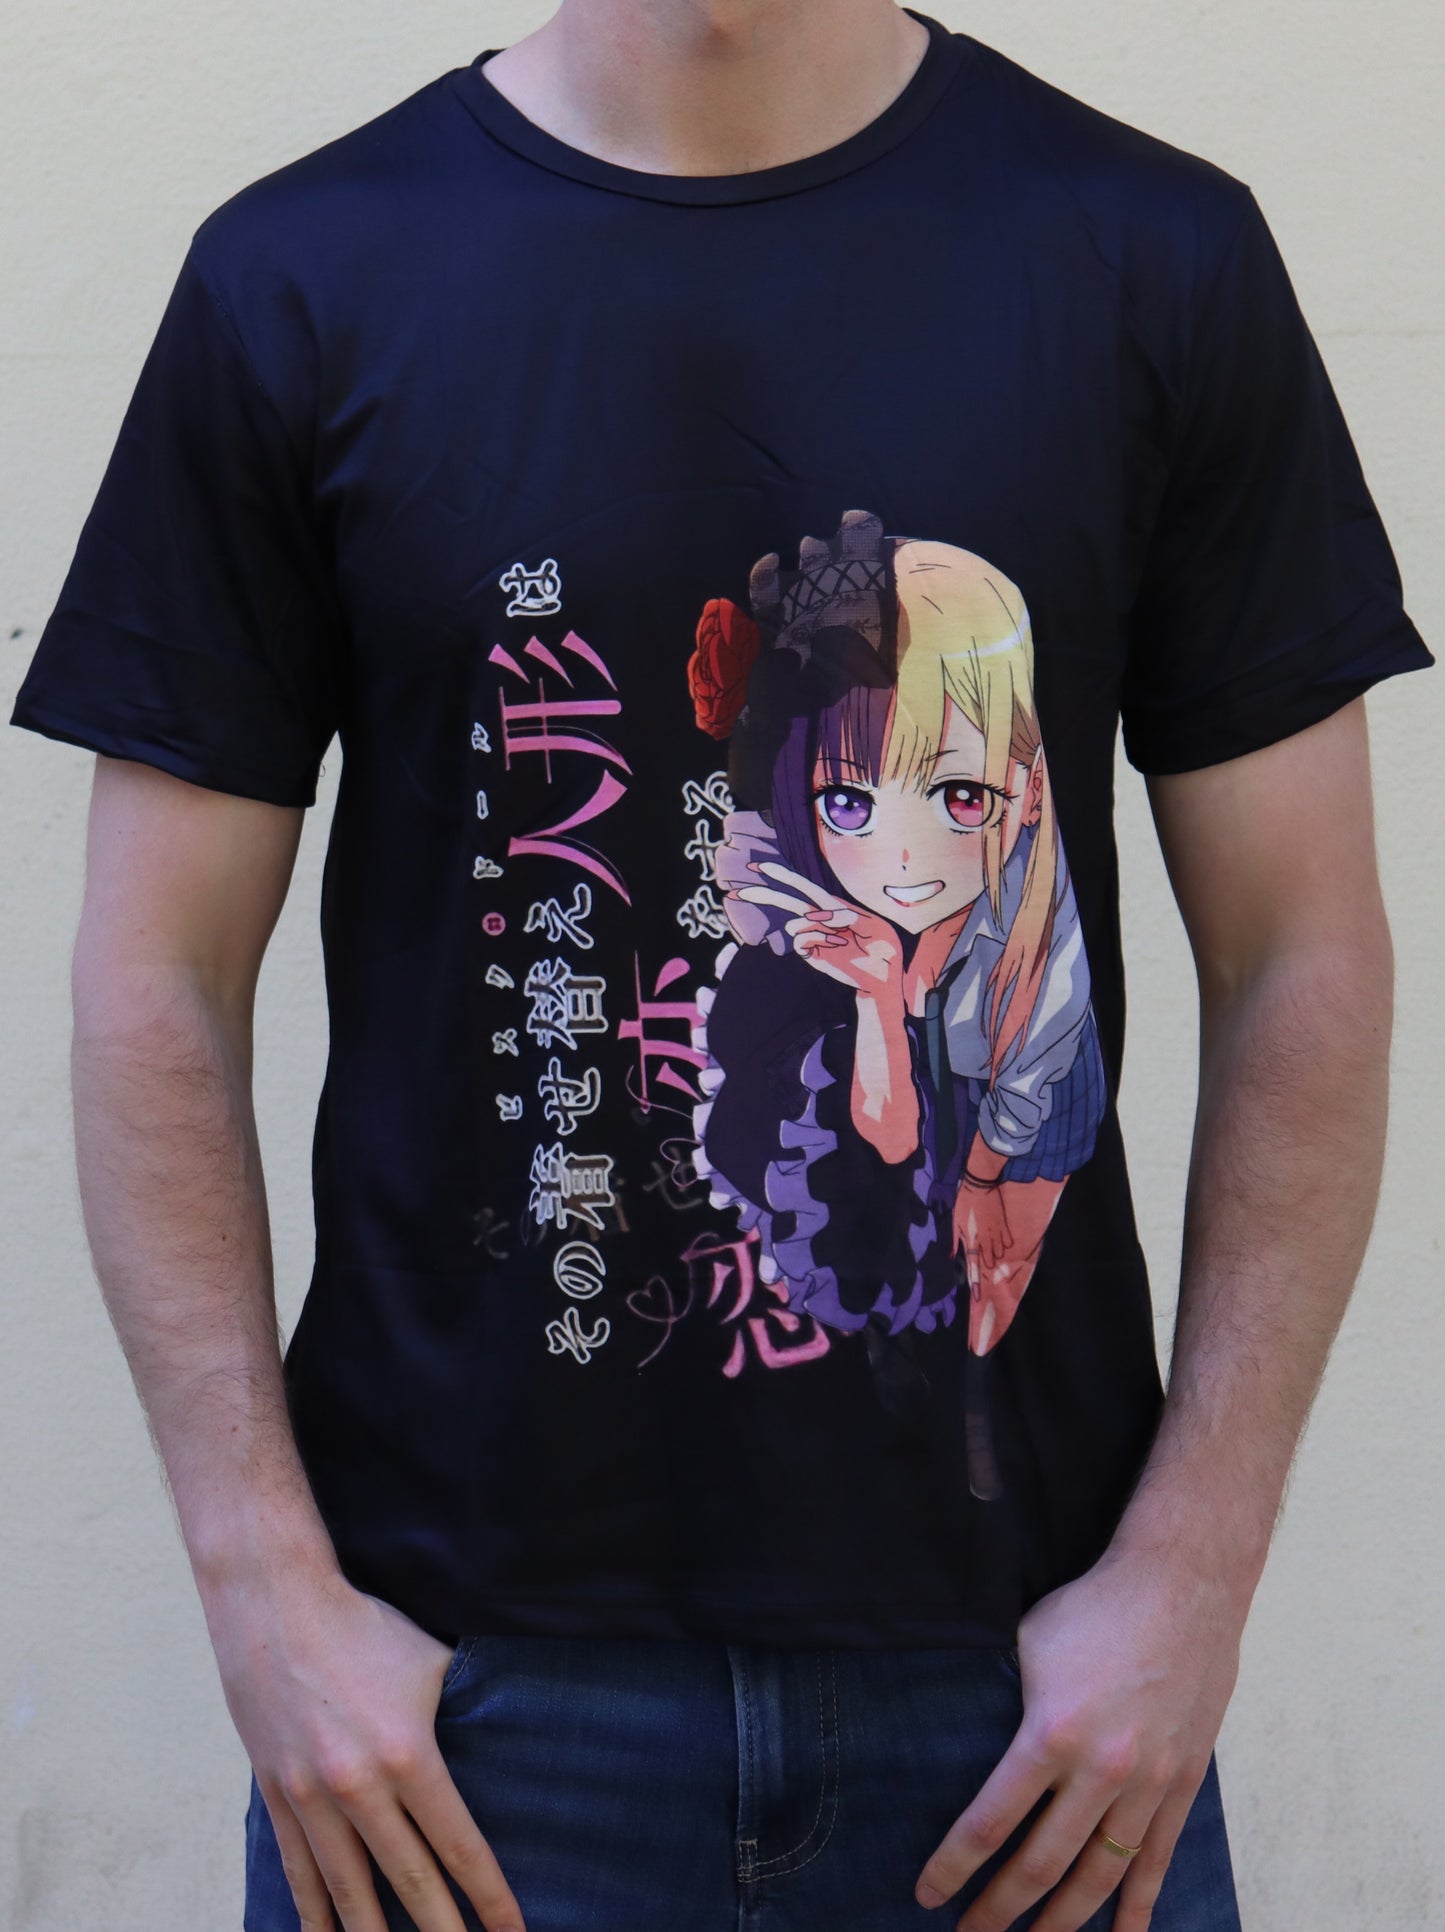 Marin Kitagawa T-Shirt(Price Does Not Include Shipping)